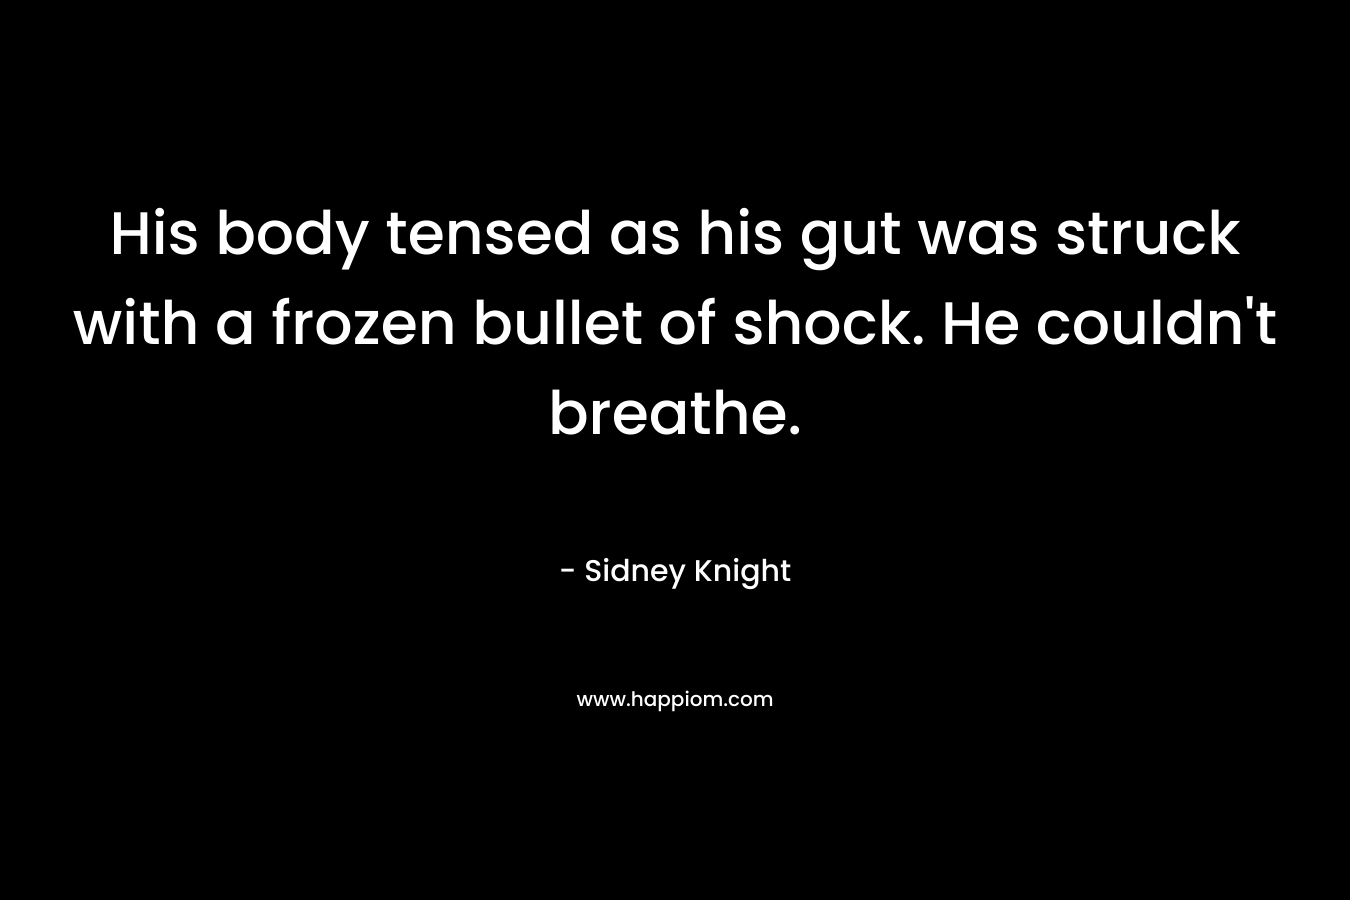 His body tensed as his gut was struck with a frozen bullet of shock. He couldn't breathe.